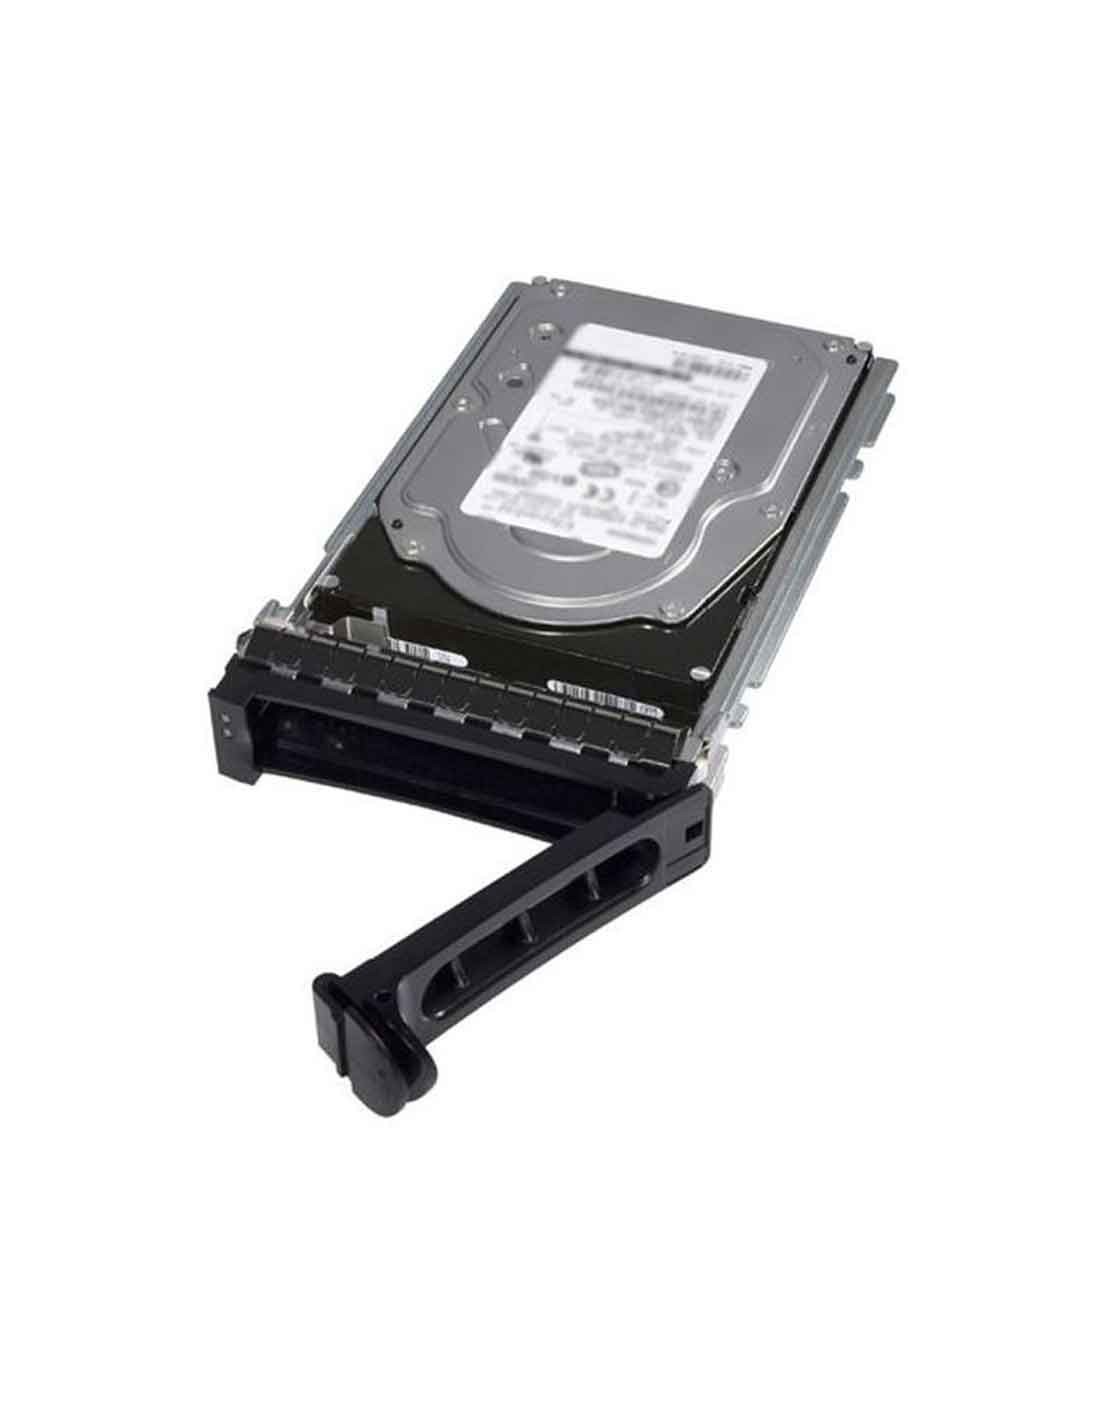 Dell 4TB 7.2K RPM NLSAS 12Gbps 512n 3.5in Hot-plug Drive at a cheap price and free delivery in Dubai yaddas karti